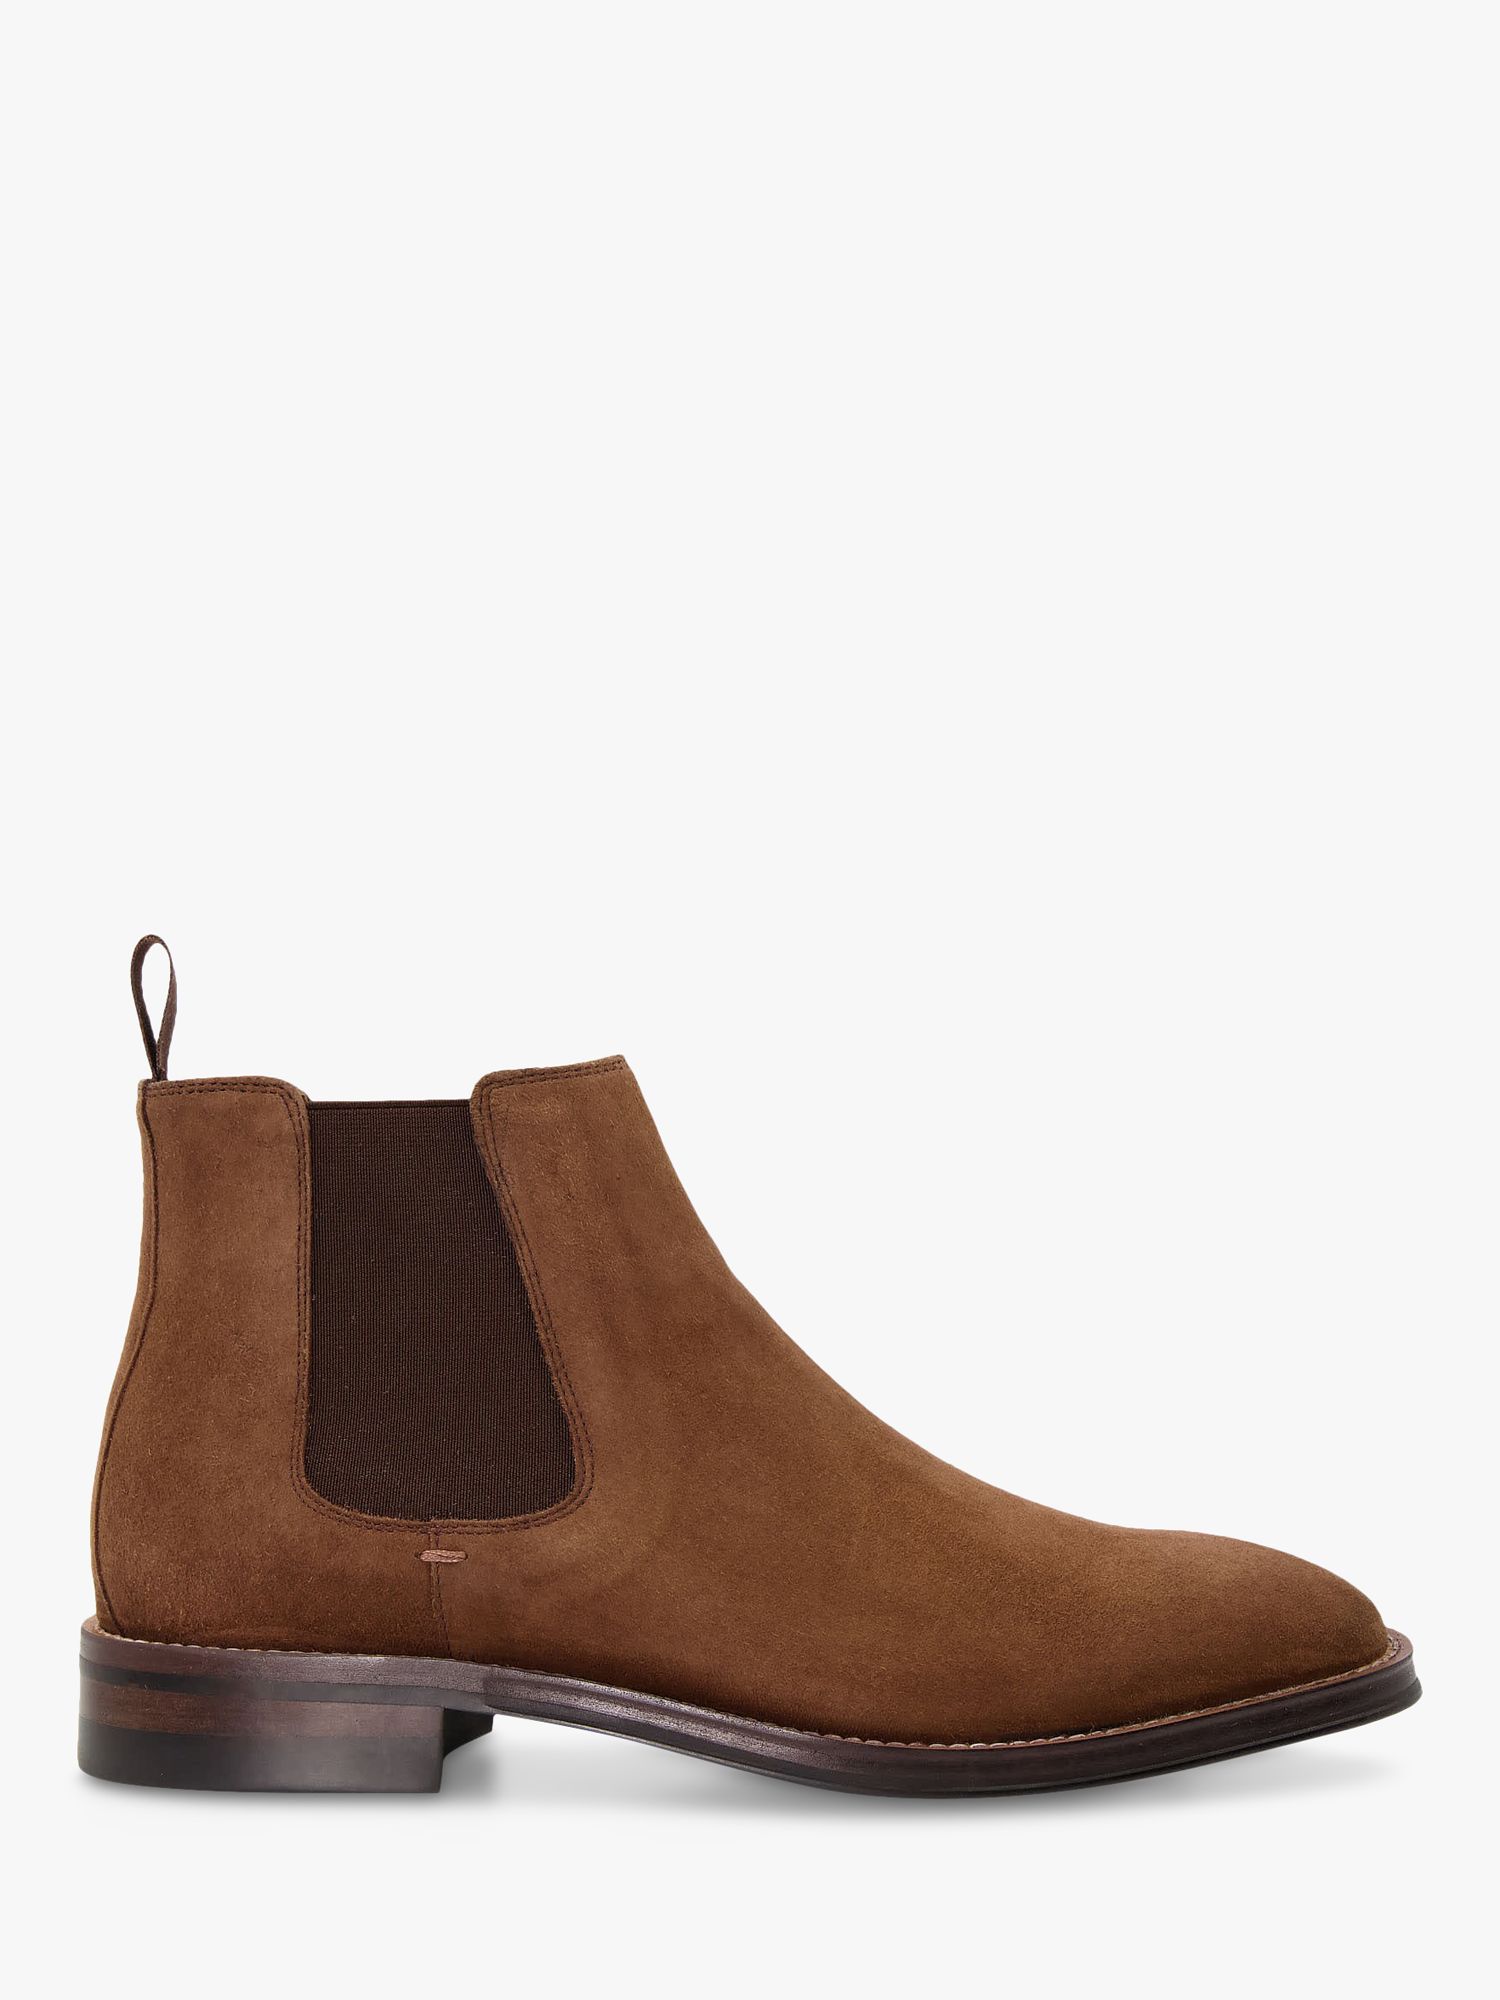 Dune Masons Suede Chelsea Boots, Brown, 6